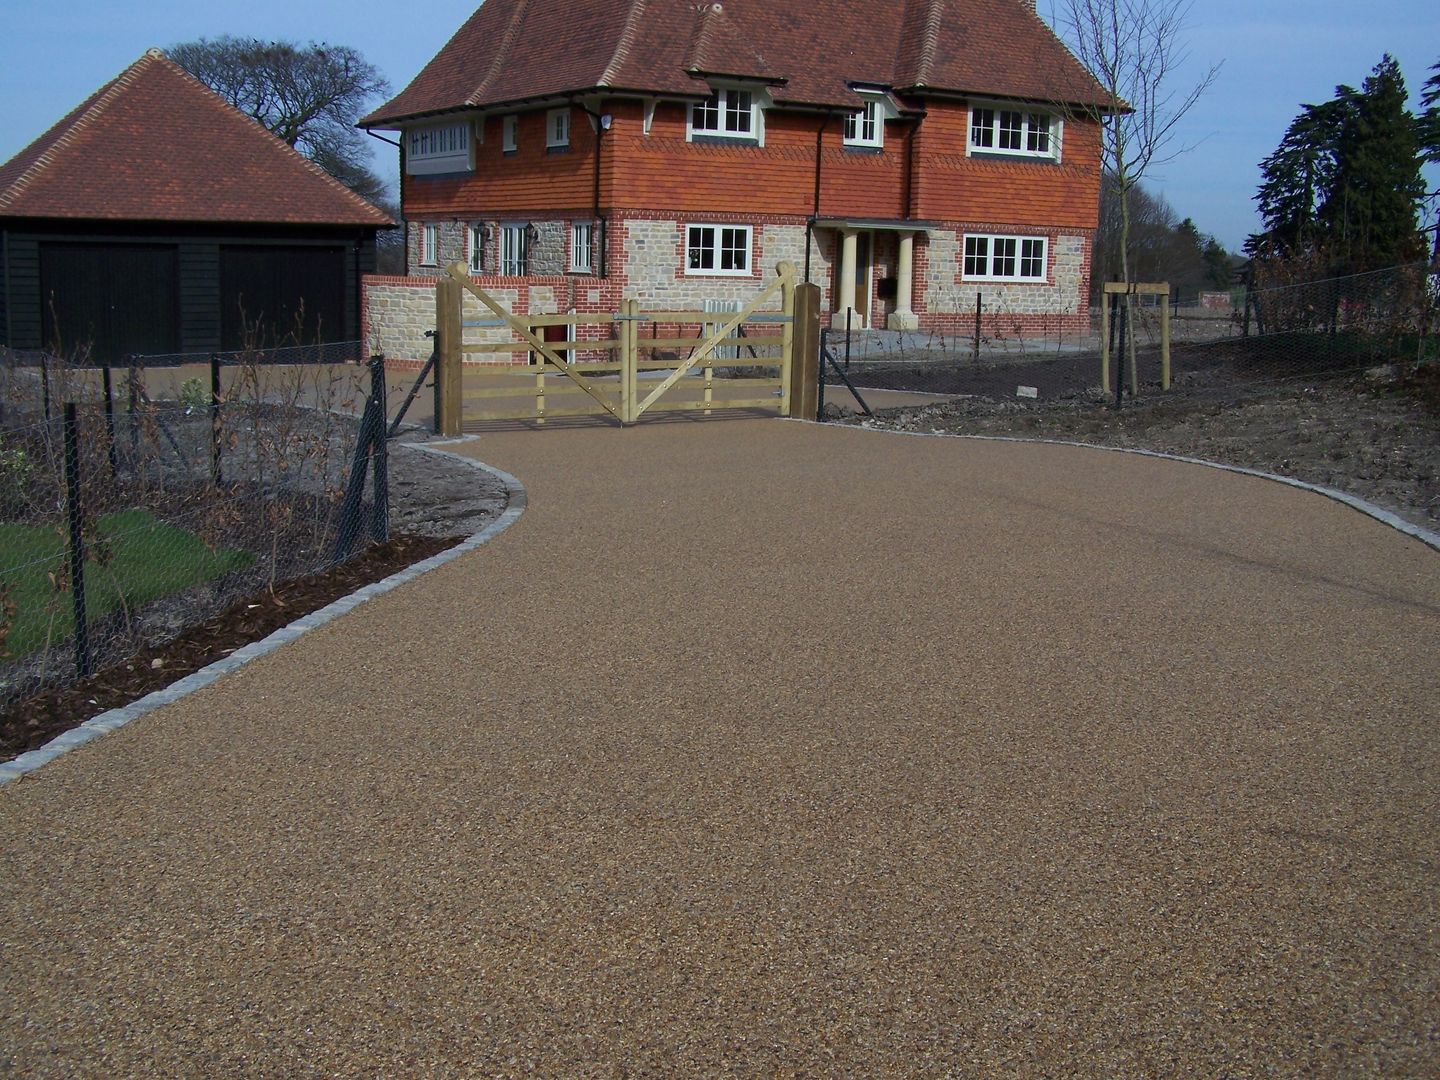 Domestic Driveways installation of resin bound paving, Permeable Paving Solutions UK Permeable Paving Solutions UK Rustic style walls & floors